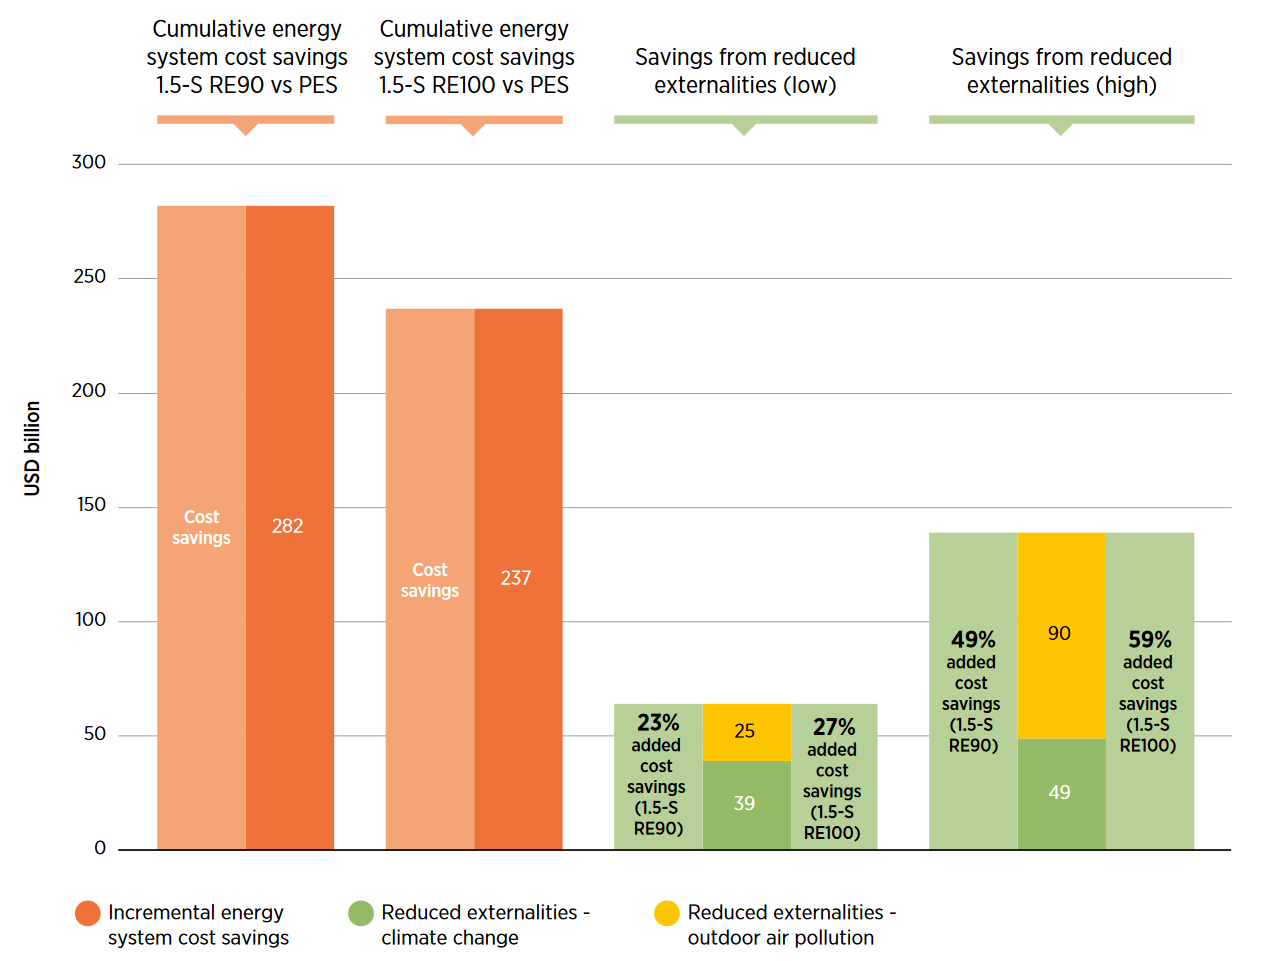 Total Energy System Cost of Transitioning Towards the 1.5-S Over the PES, 2018 to 2050, Source: IRENA